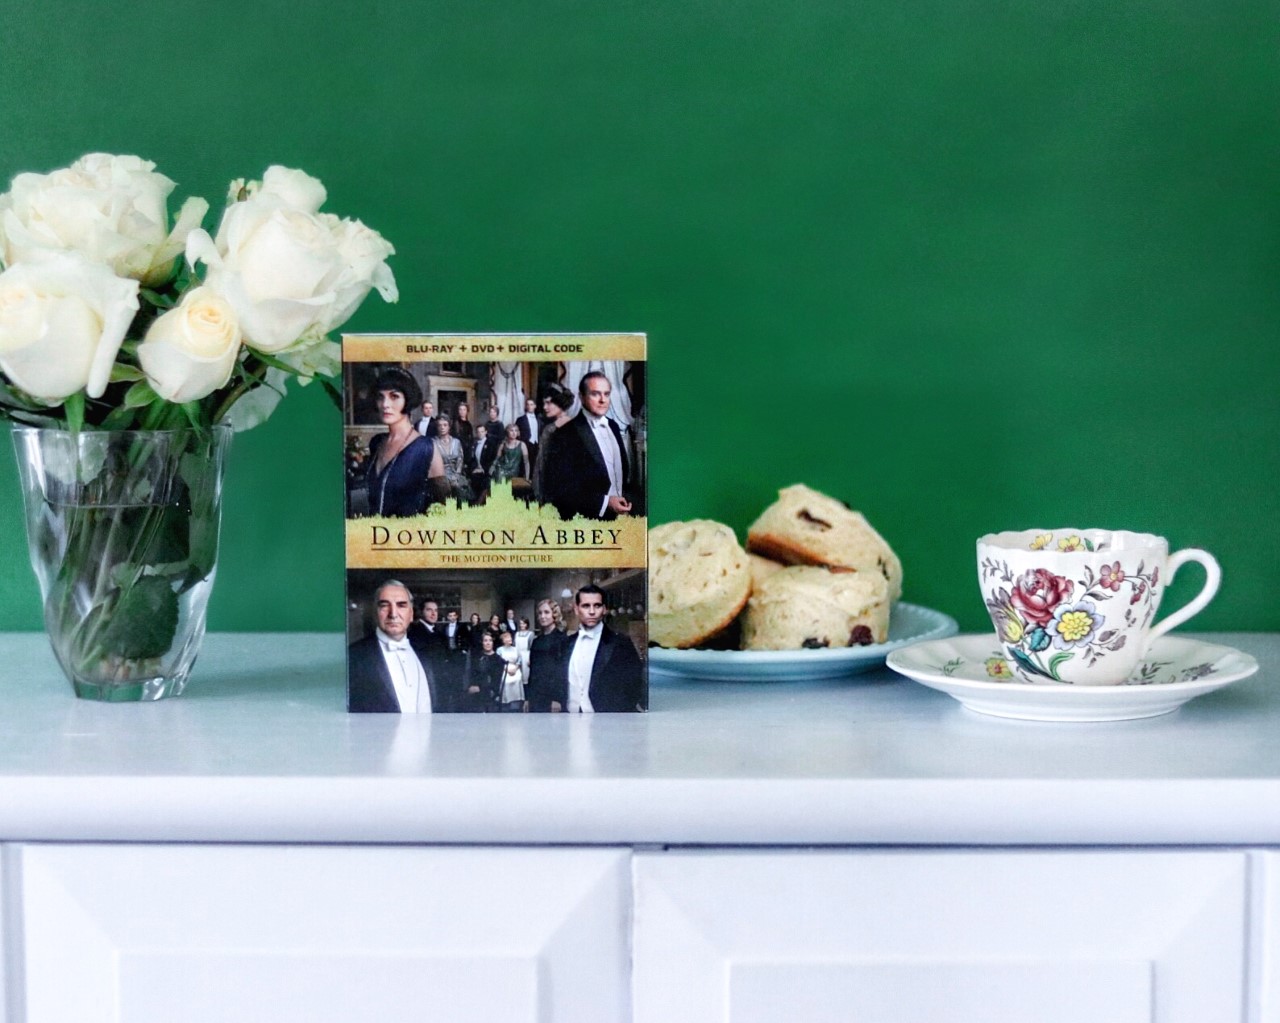 how to throw a downton abbey themed tea party to celebrate the release of the movie on dvd